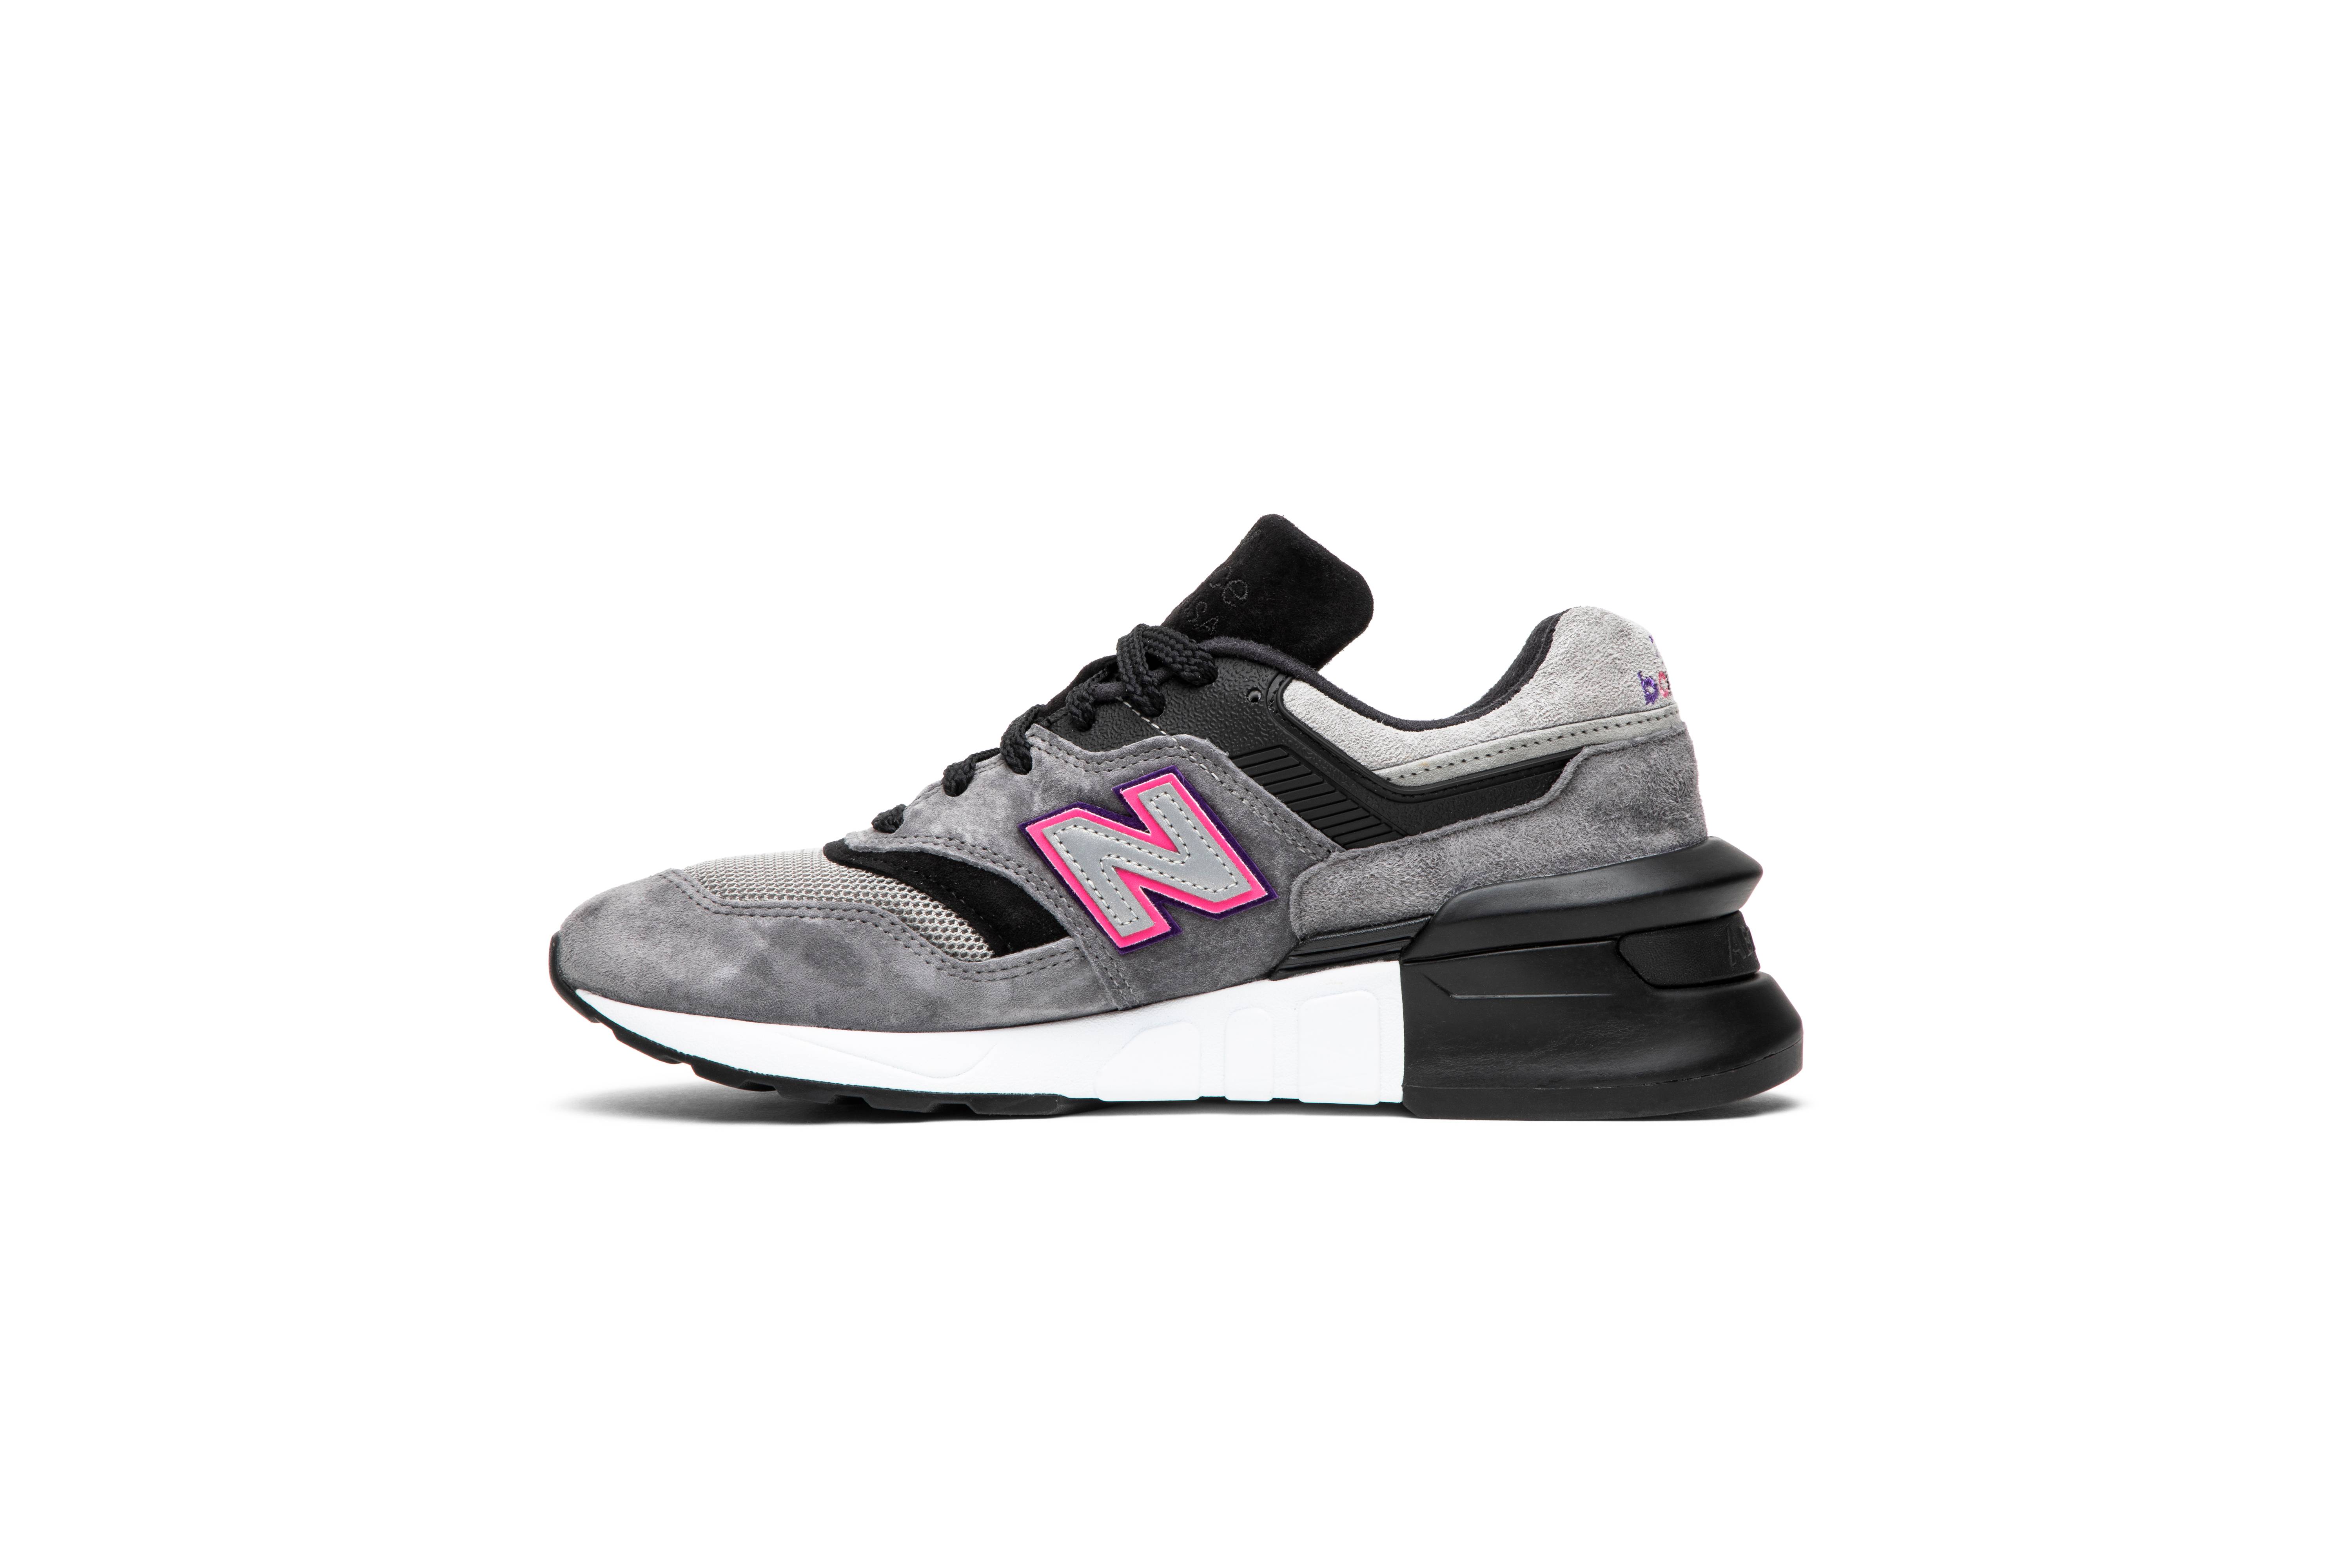 new balance 997s fusion kith x united arrows and sons grey pink